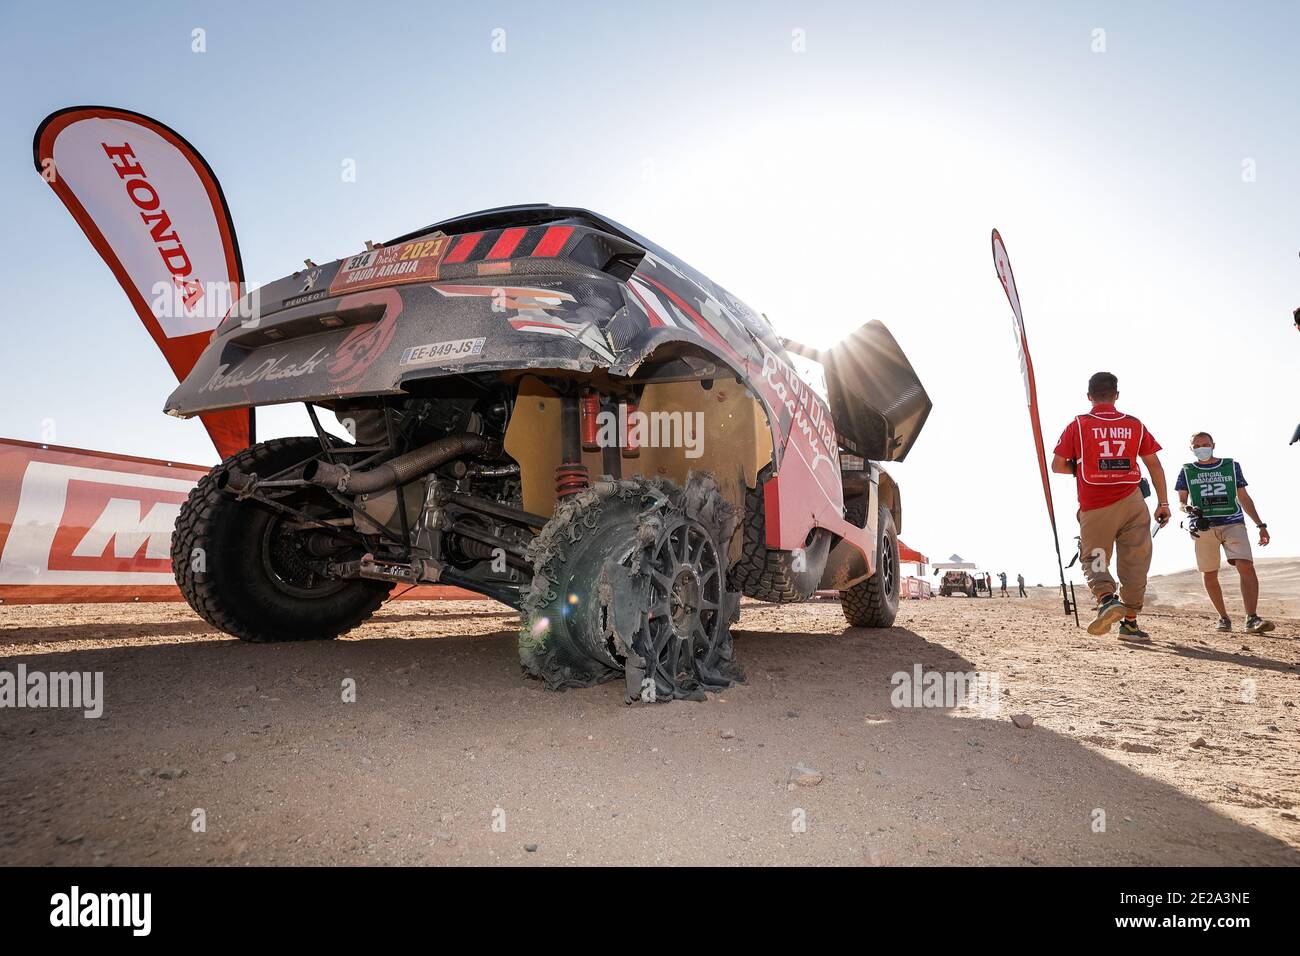 314 Despres Cyril (fra), Horn Mike (swi), Peugeot, PH Sport, Abu Dhabi  Racing, Auto, crevaison, puncture during the 9th st / LM Stock Photo - Alamy